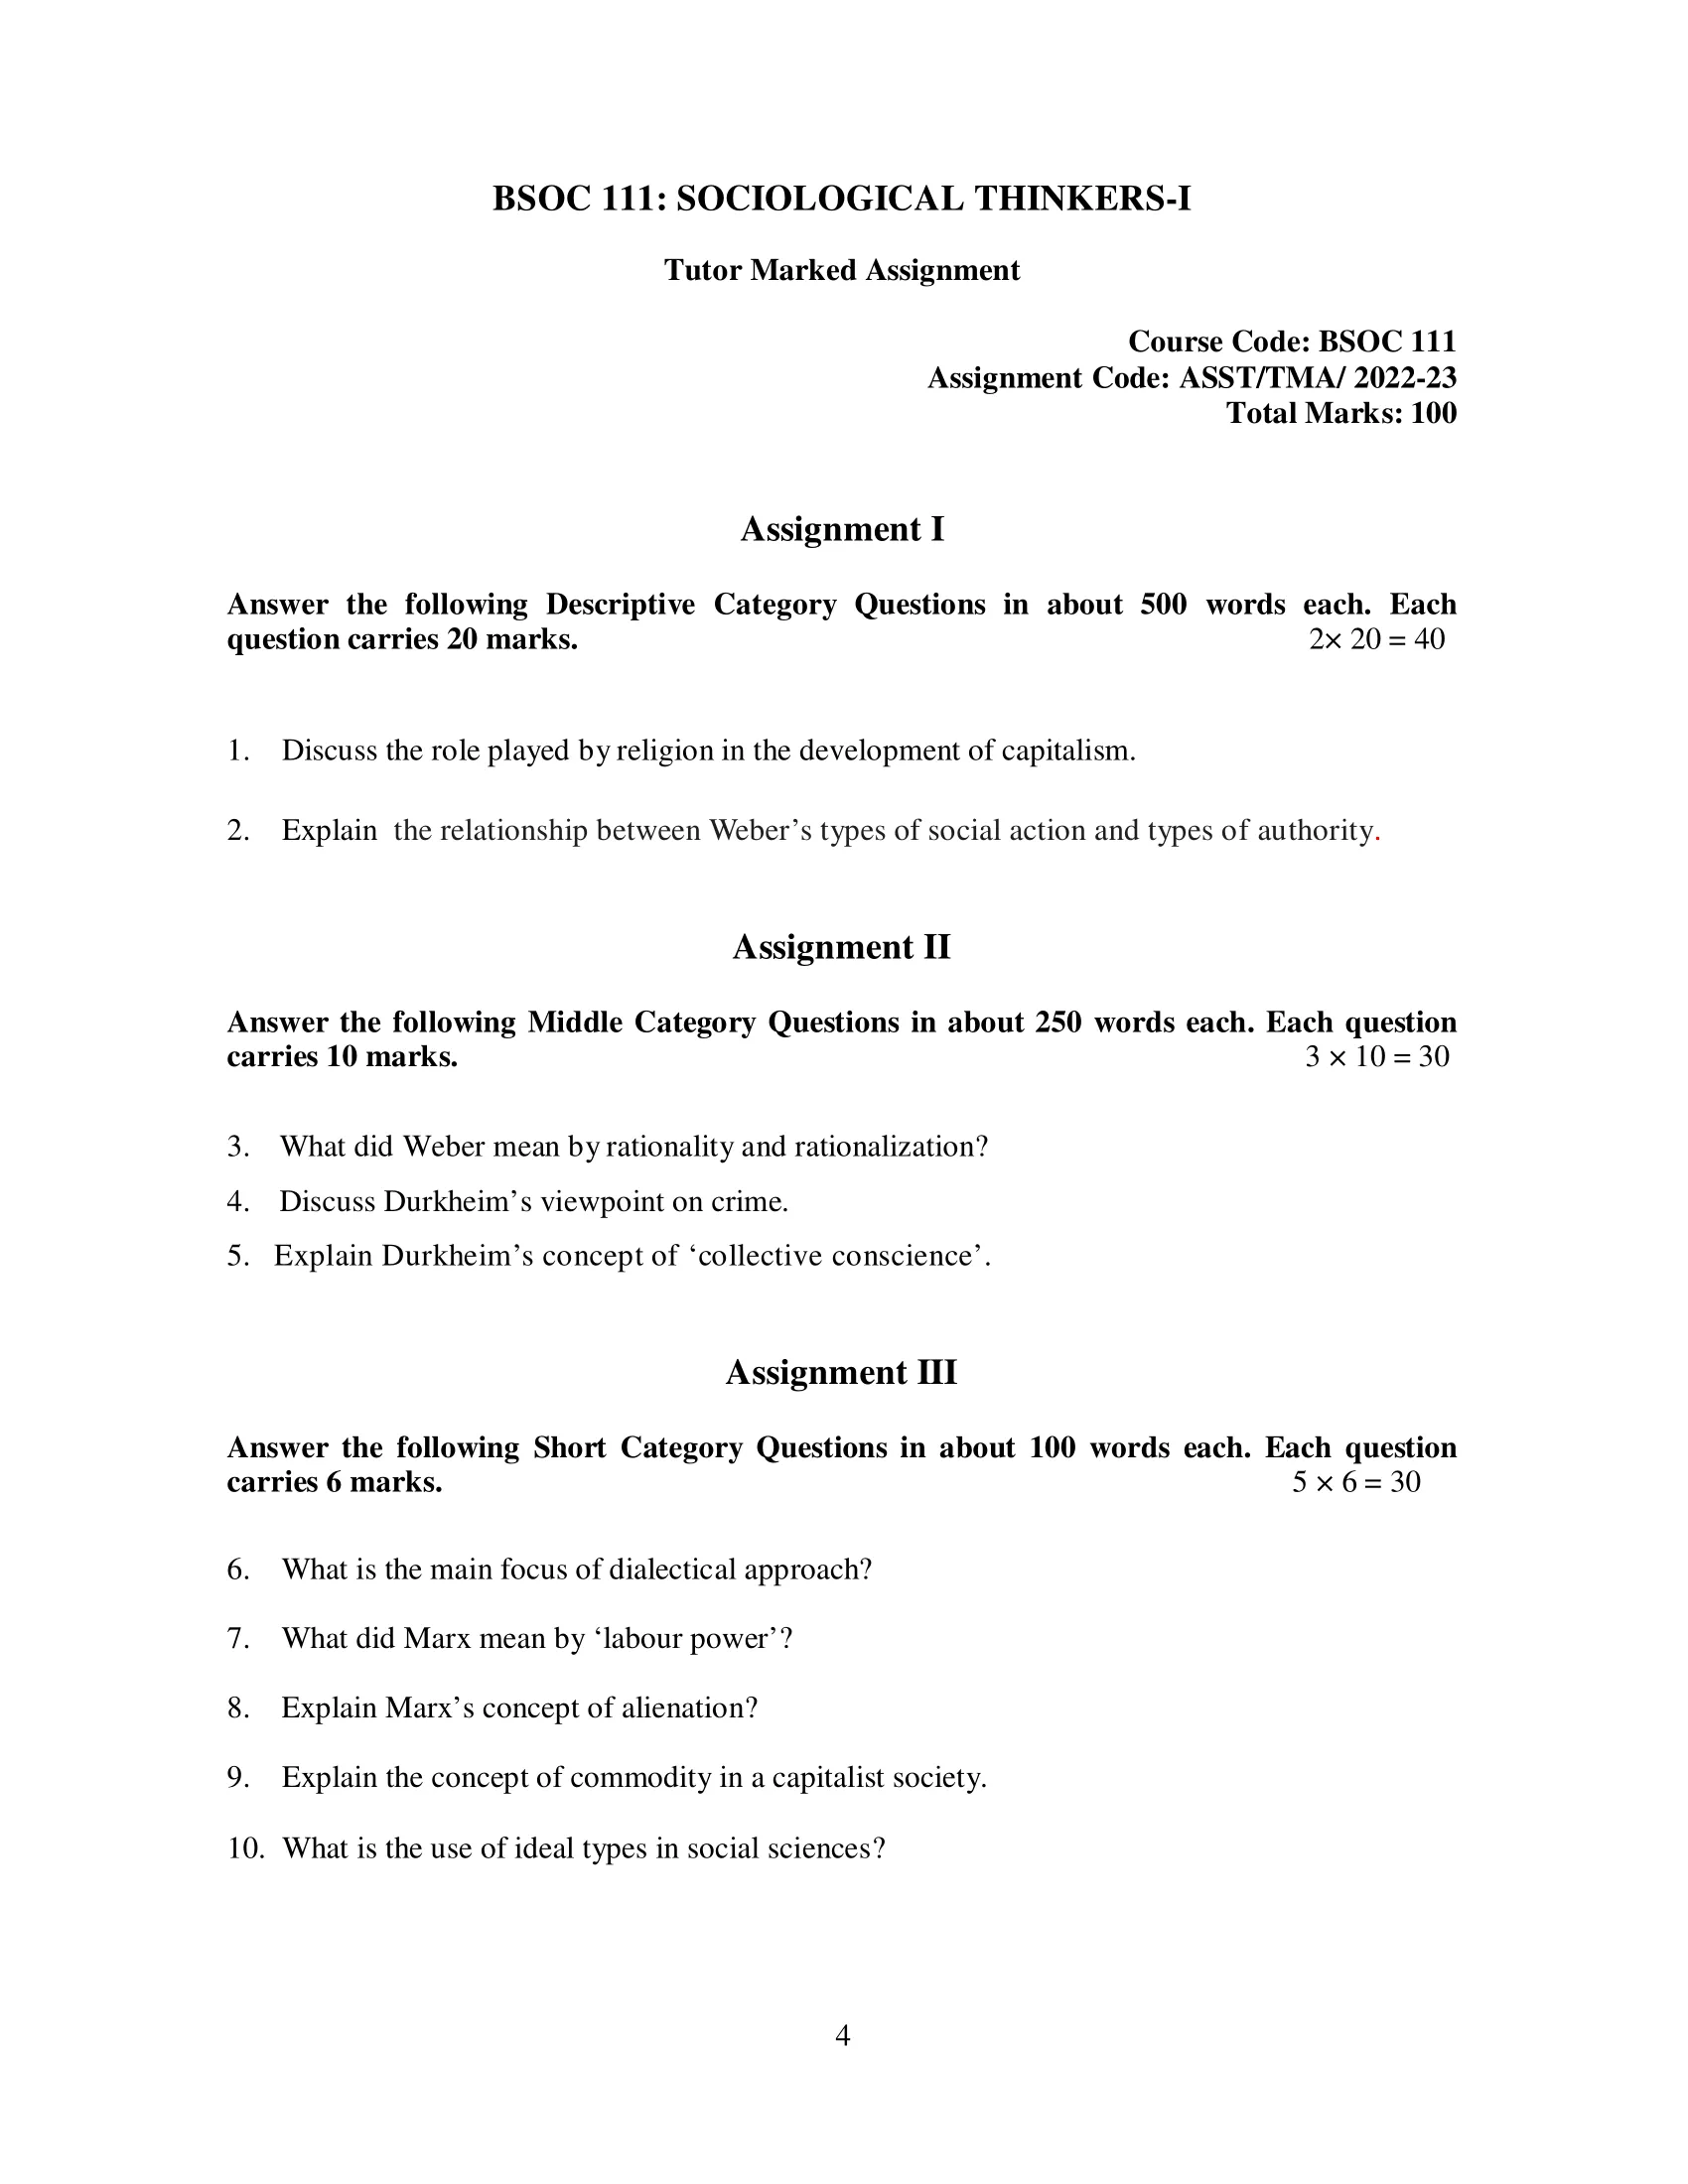 BSOC 111 IGNOU BAG Solved Assignment-SOCIOLOGICAL THINKERS-I